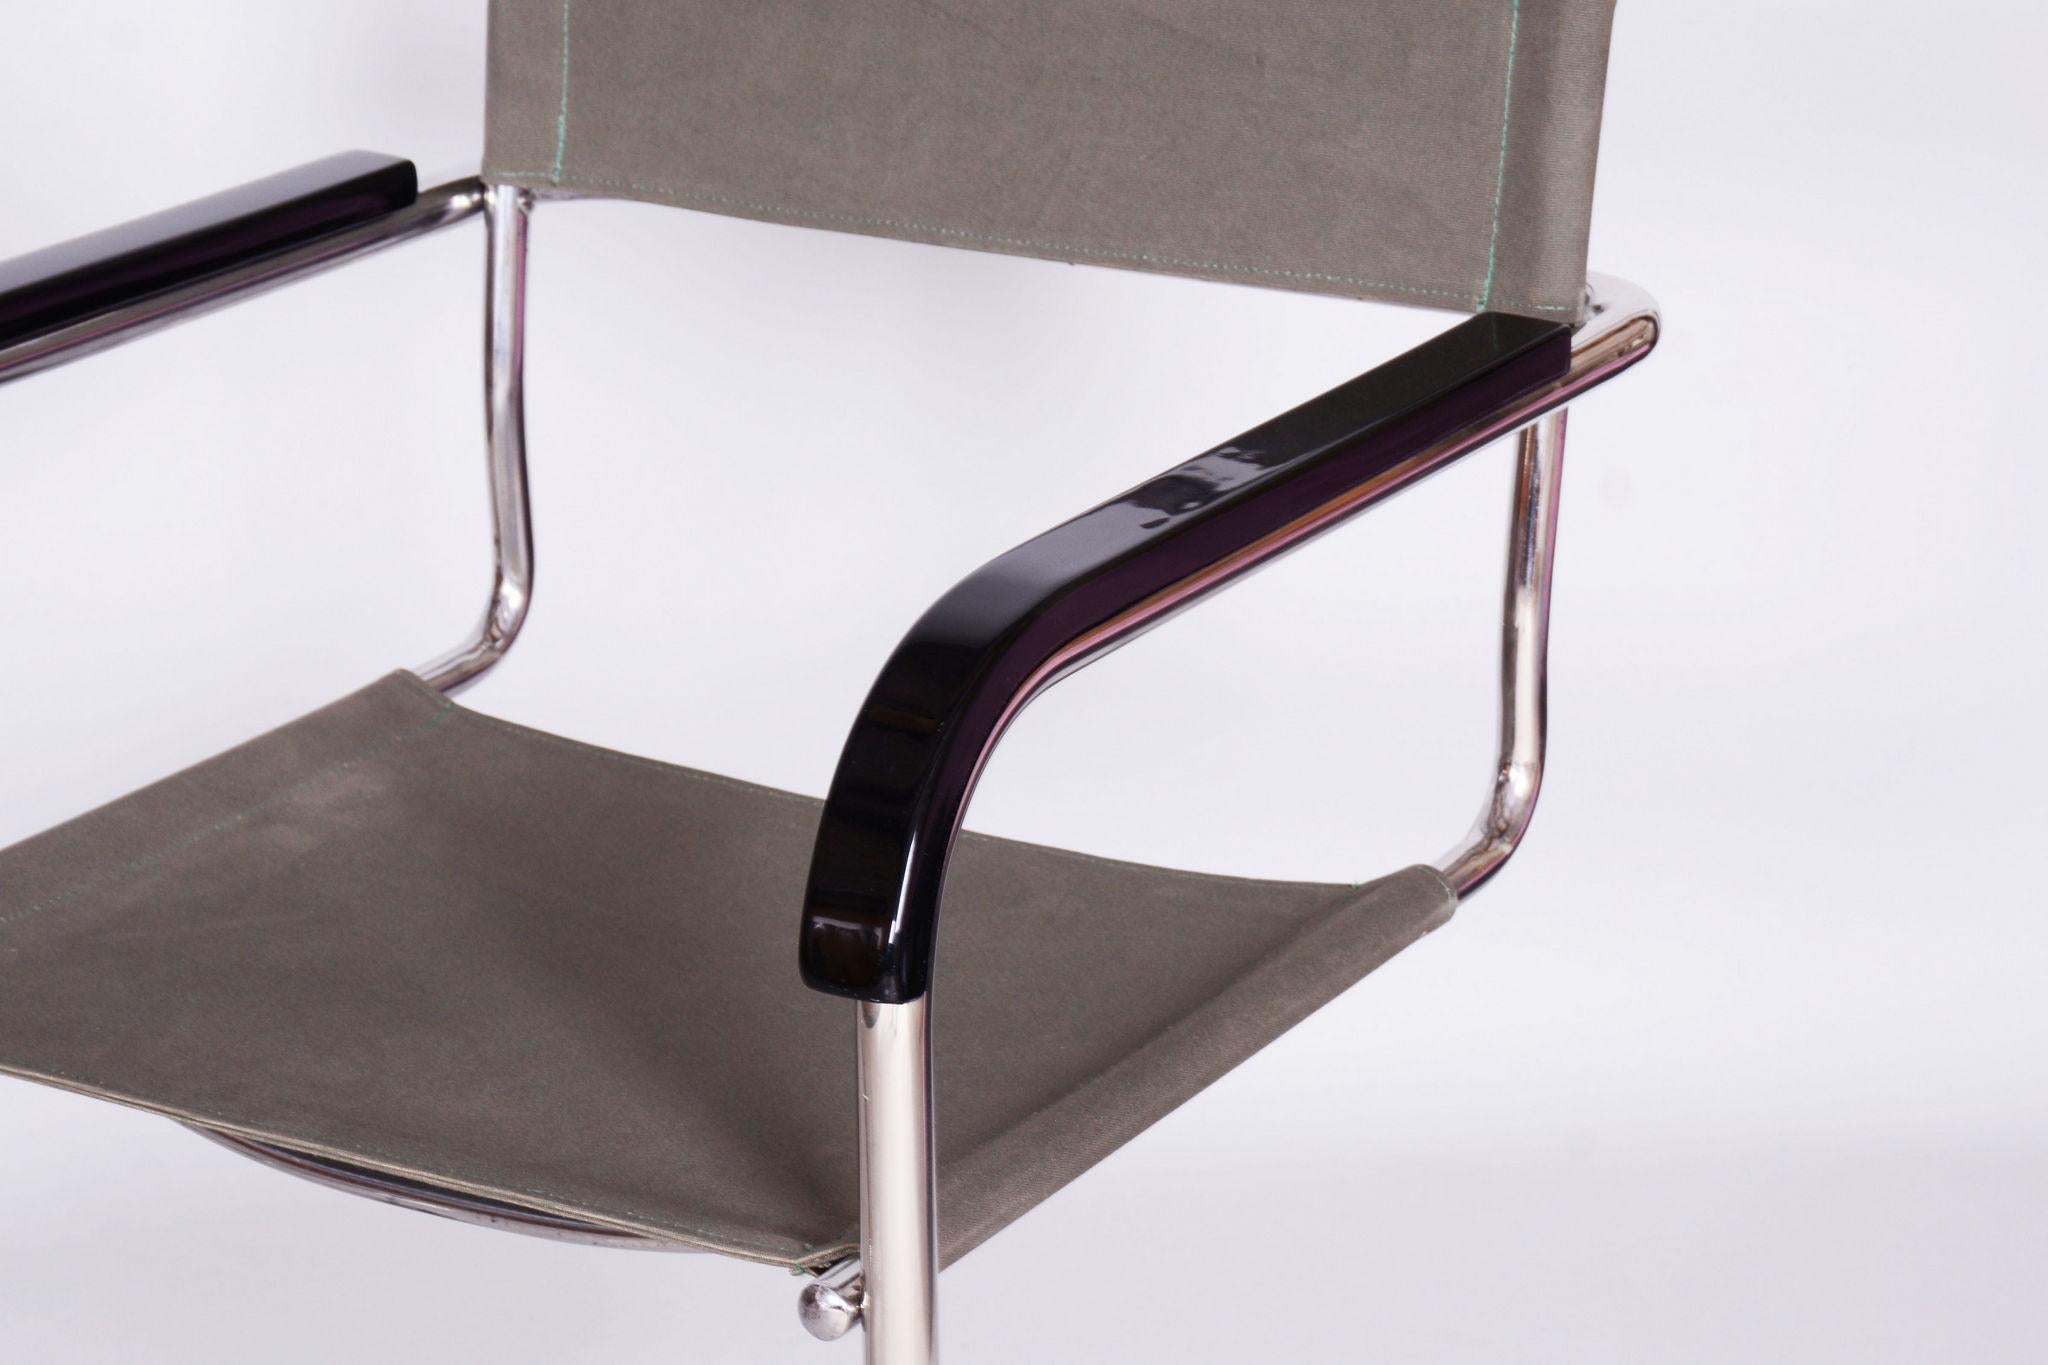 Restored Bauhaus Pair of Armchairs, by Thonet, by Marcel Breuer, Czech, 1930s For Sale 1